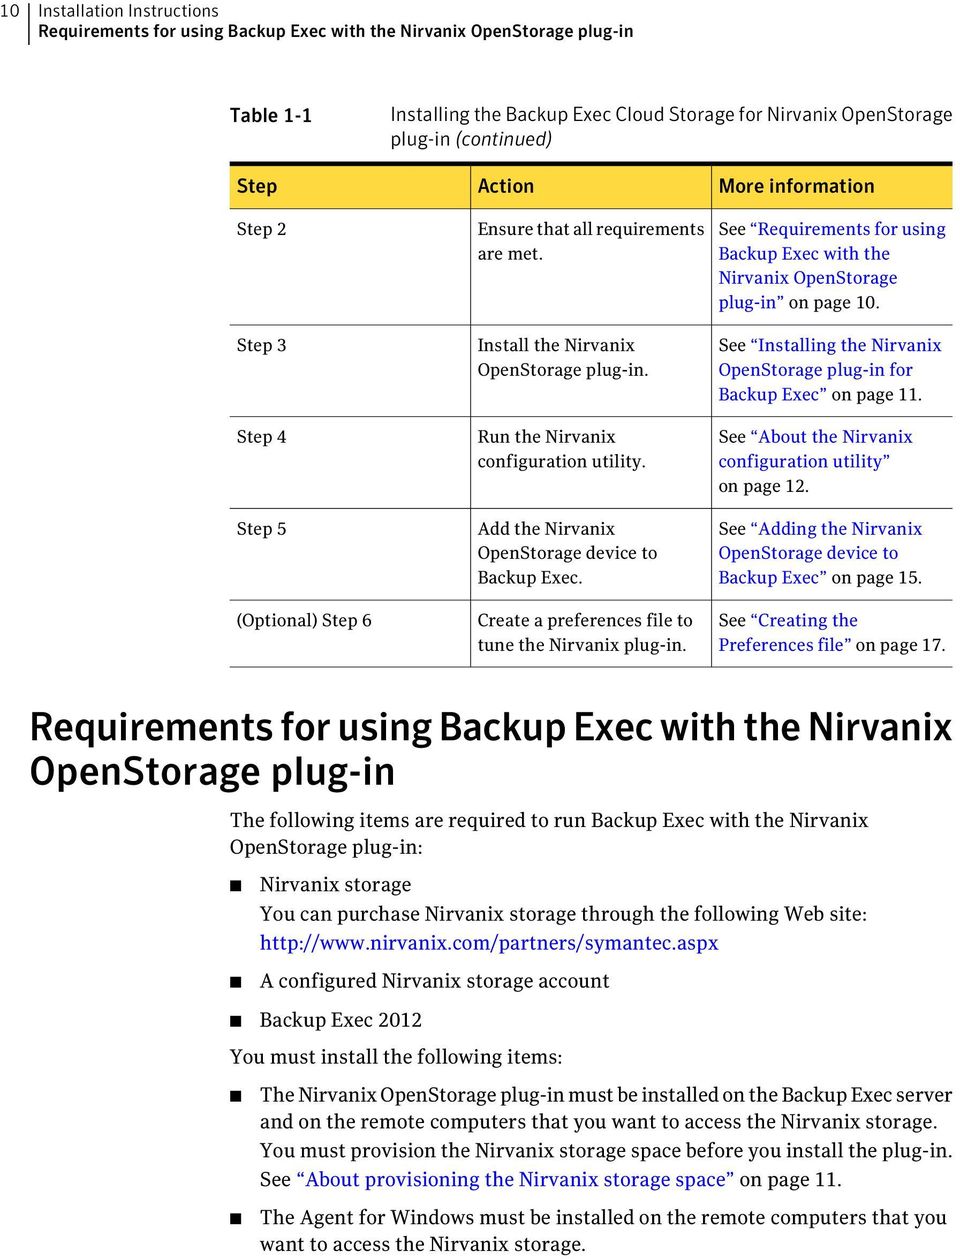 Add the Nirvanix OpenStorage device to Backup Exec. Create a preferences file to tune the Nirvanix plug-in.